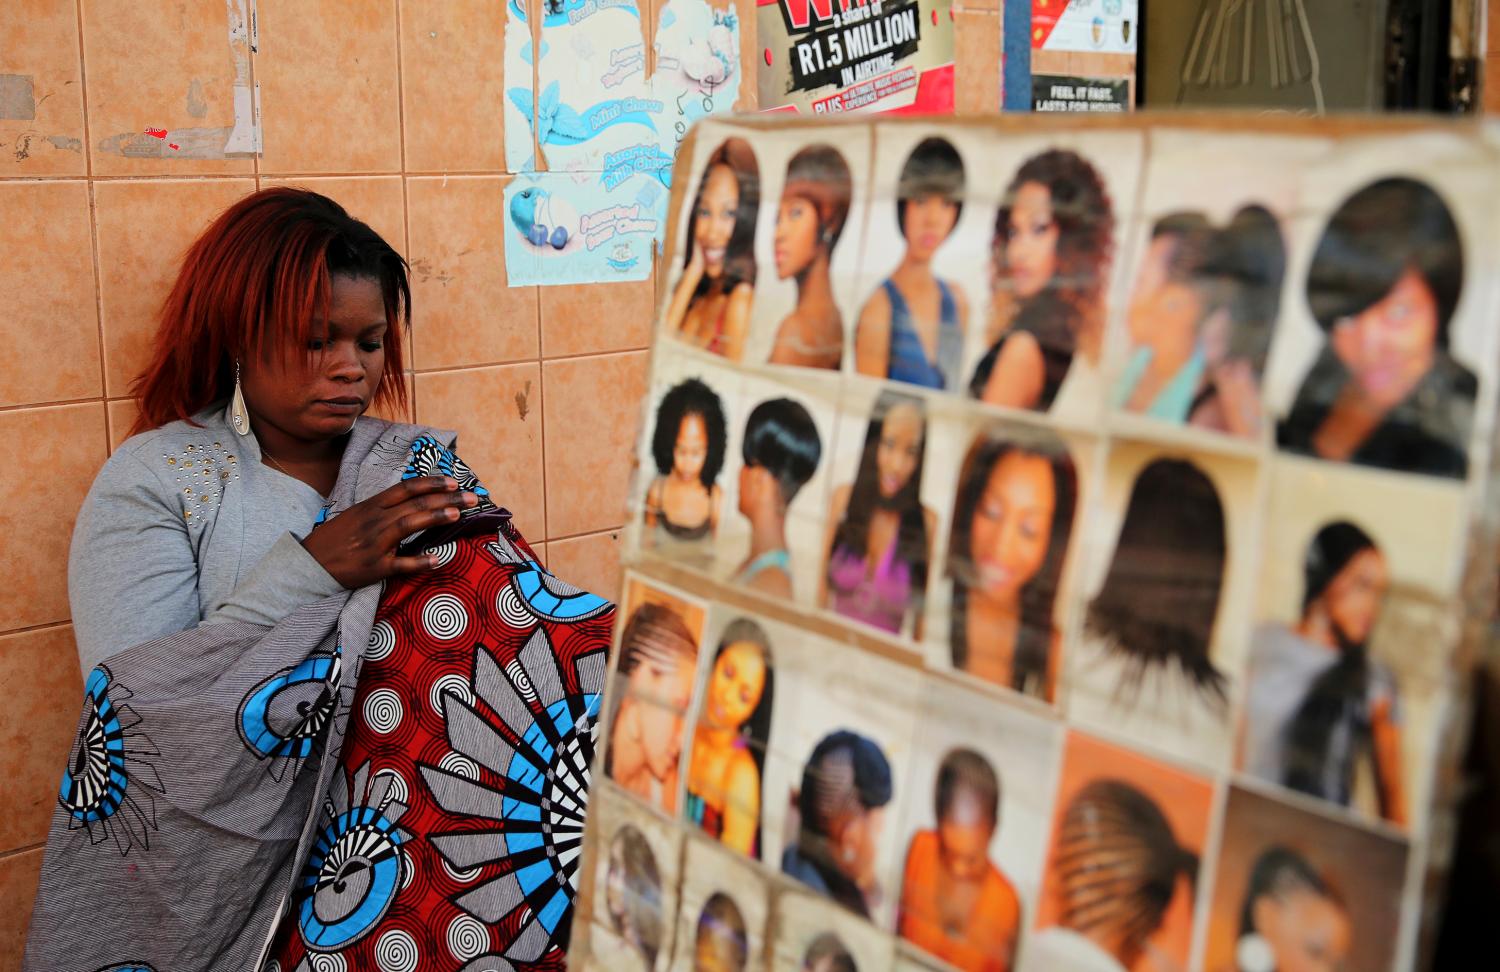 A hairdresser uses her phone as she waits for clients at a makeshift saloon in Soweto, August 4, 2014. While still largely based in the informal economy, the African haircare business has become a multi-billion dollar industry that stretches to China and India and has drawn global giants such as L'Oreal and Unilever. Hairdressers are a fixture of markets and taxi ranks across Africa, reflecting both the continent's rising incomes and demand from hair-conscious women. Picture taken August 4.    REUTERS/Siphiwe Sibeko (SOUTH AFRICA - Tags: BUSINESS SOCIETY TELECOMS)